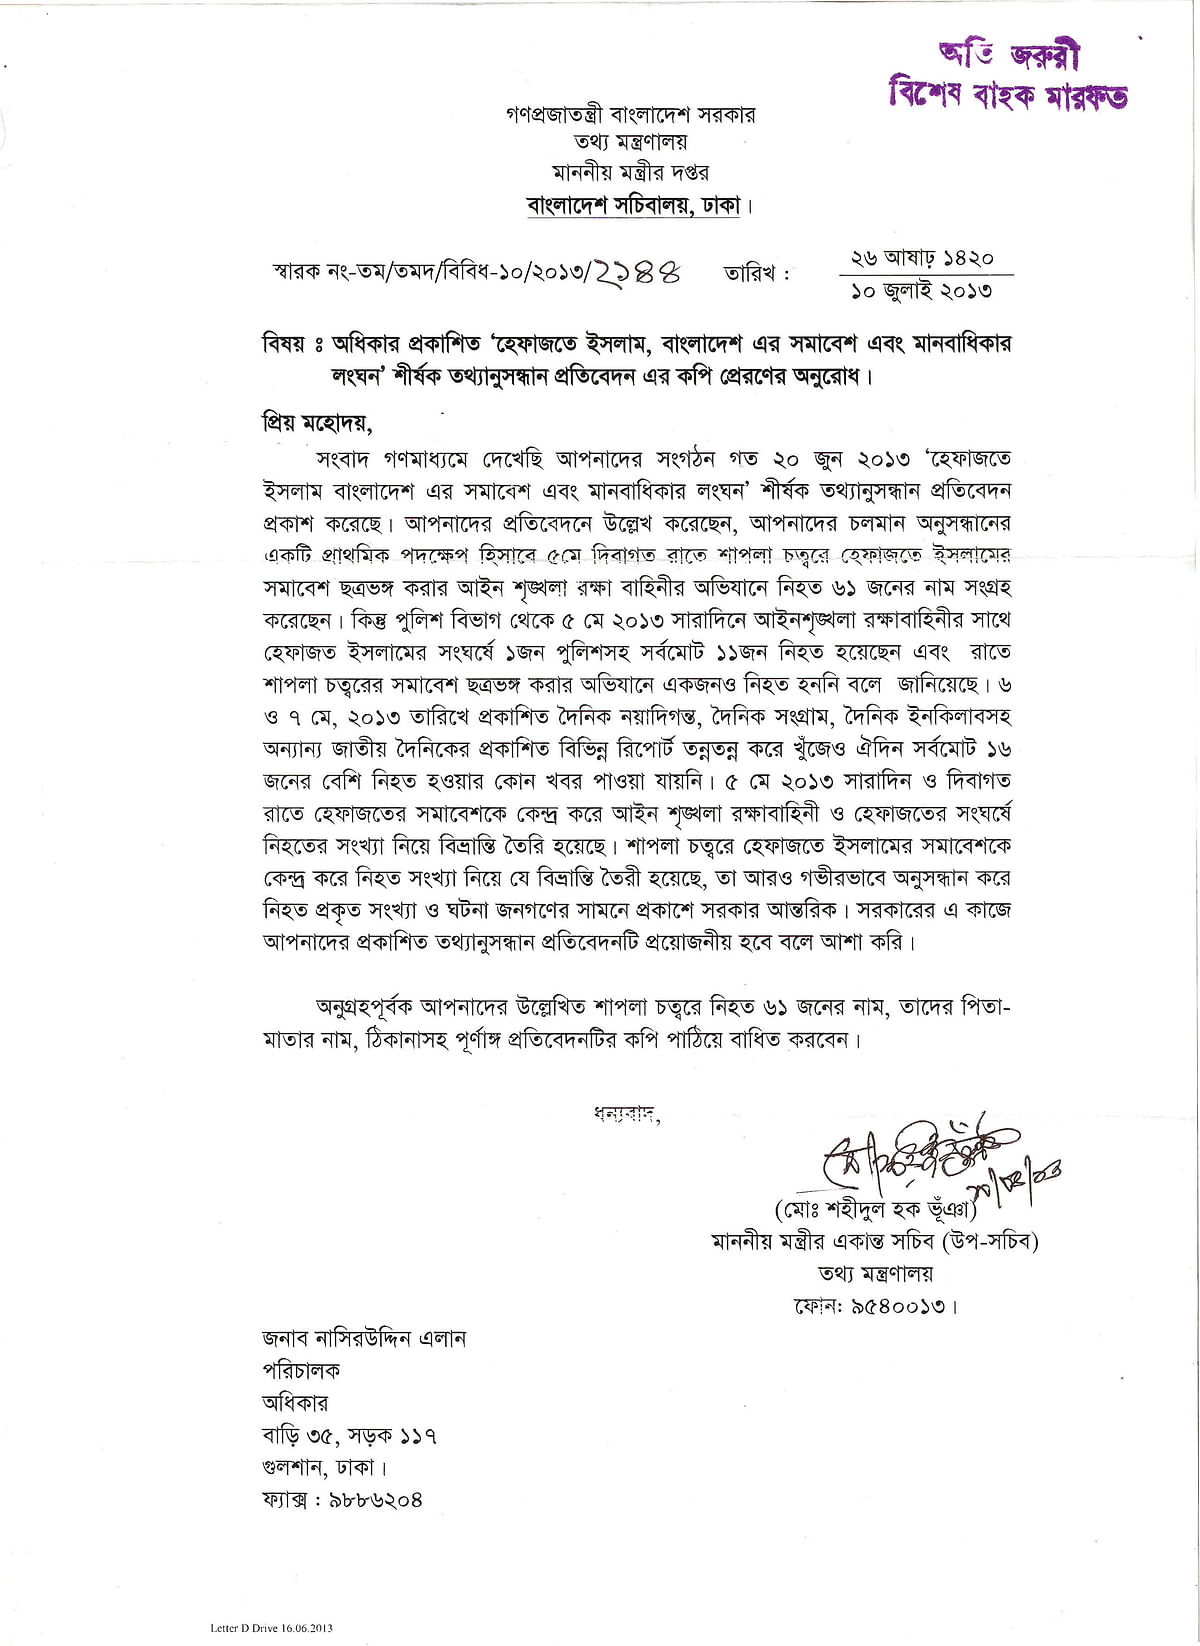 Letter from Information Ministry to Odhikar (1)